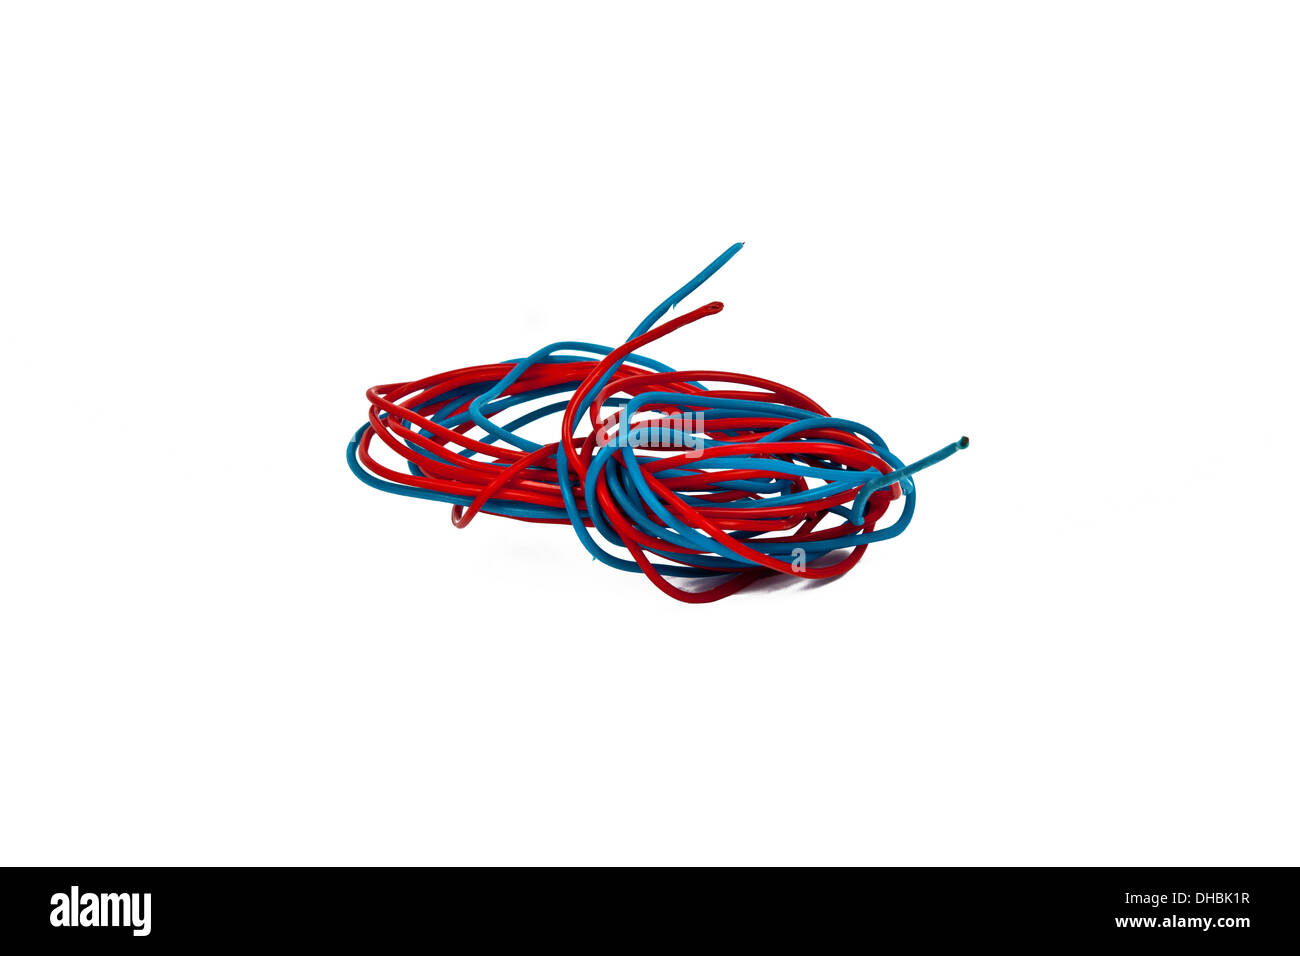 bundle of red and blue wire Stock Photo